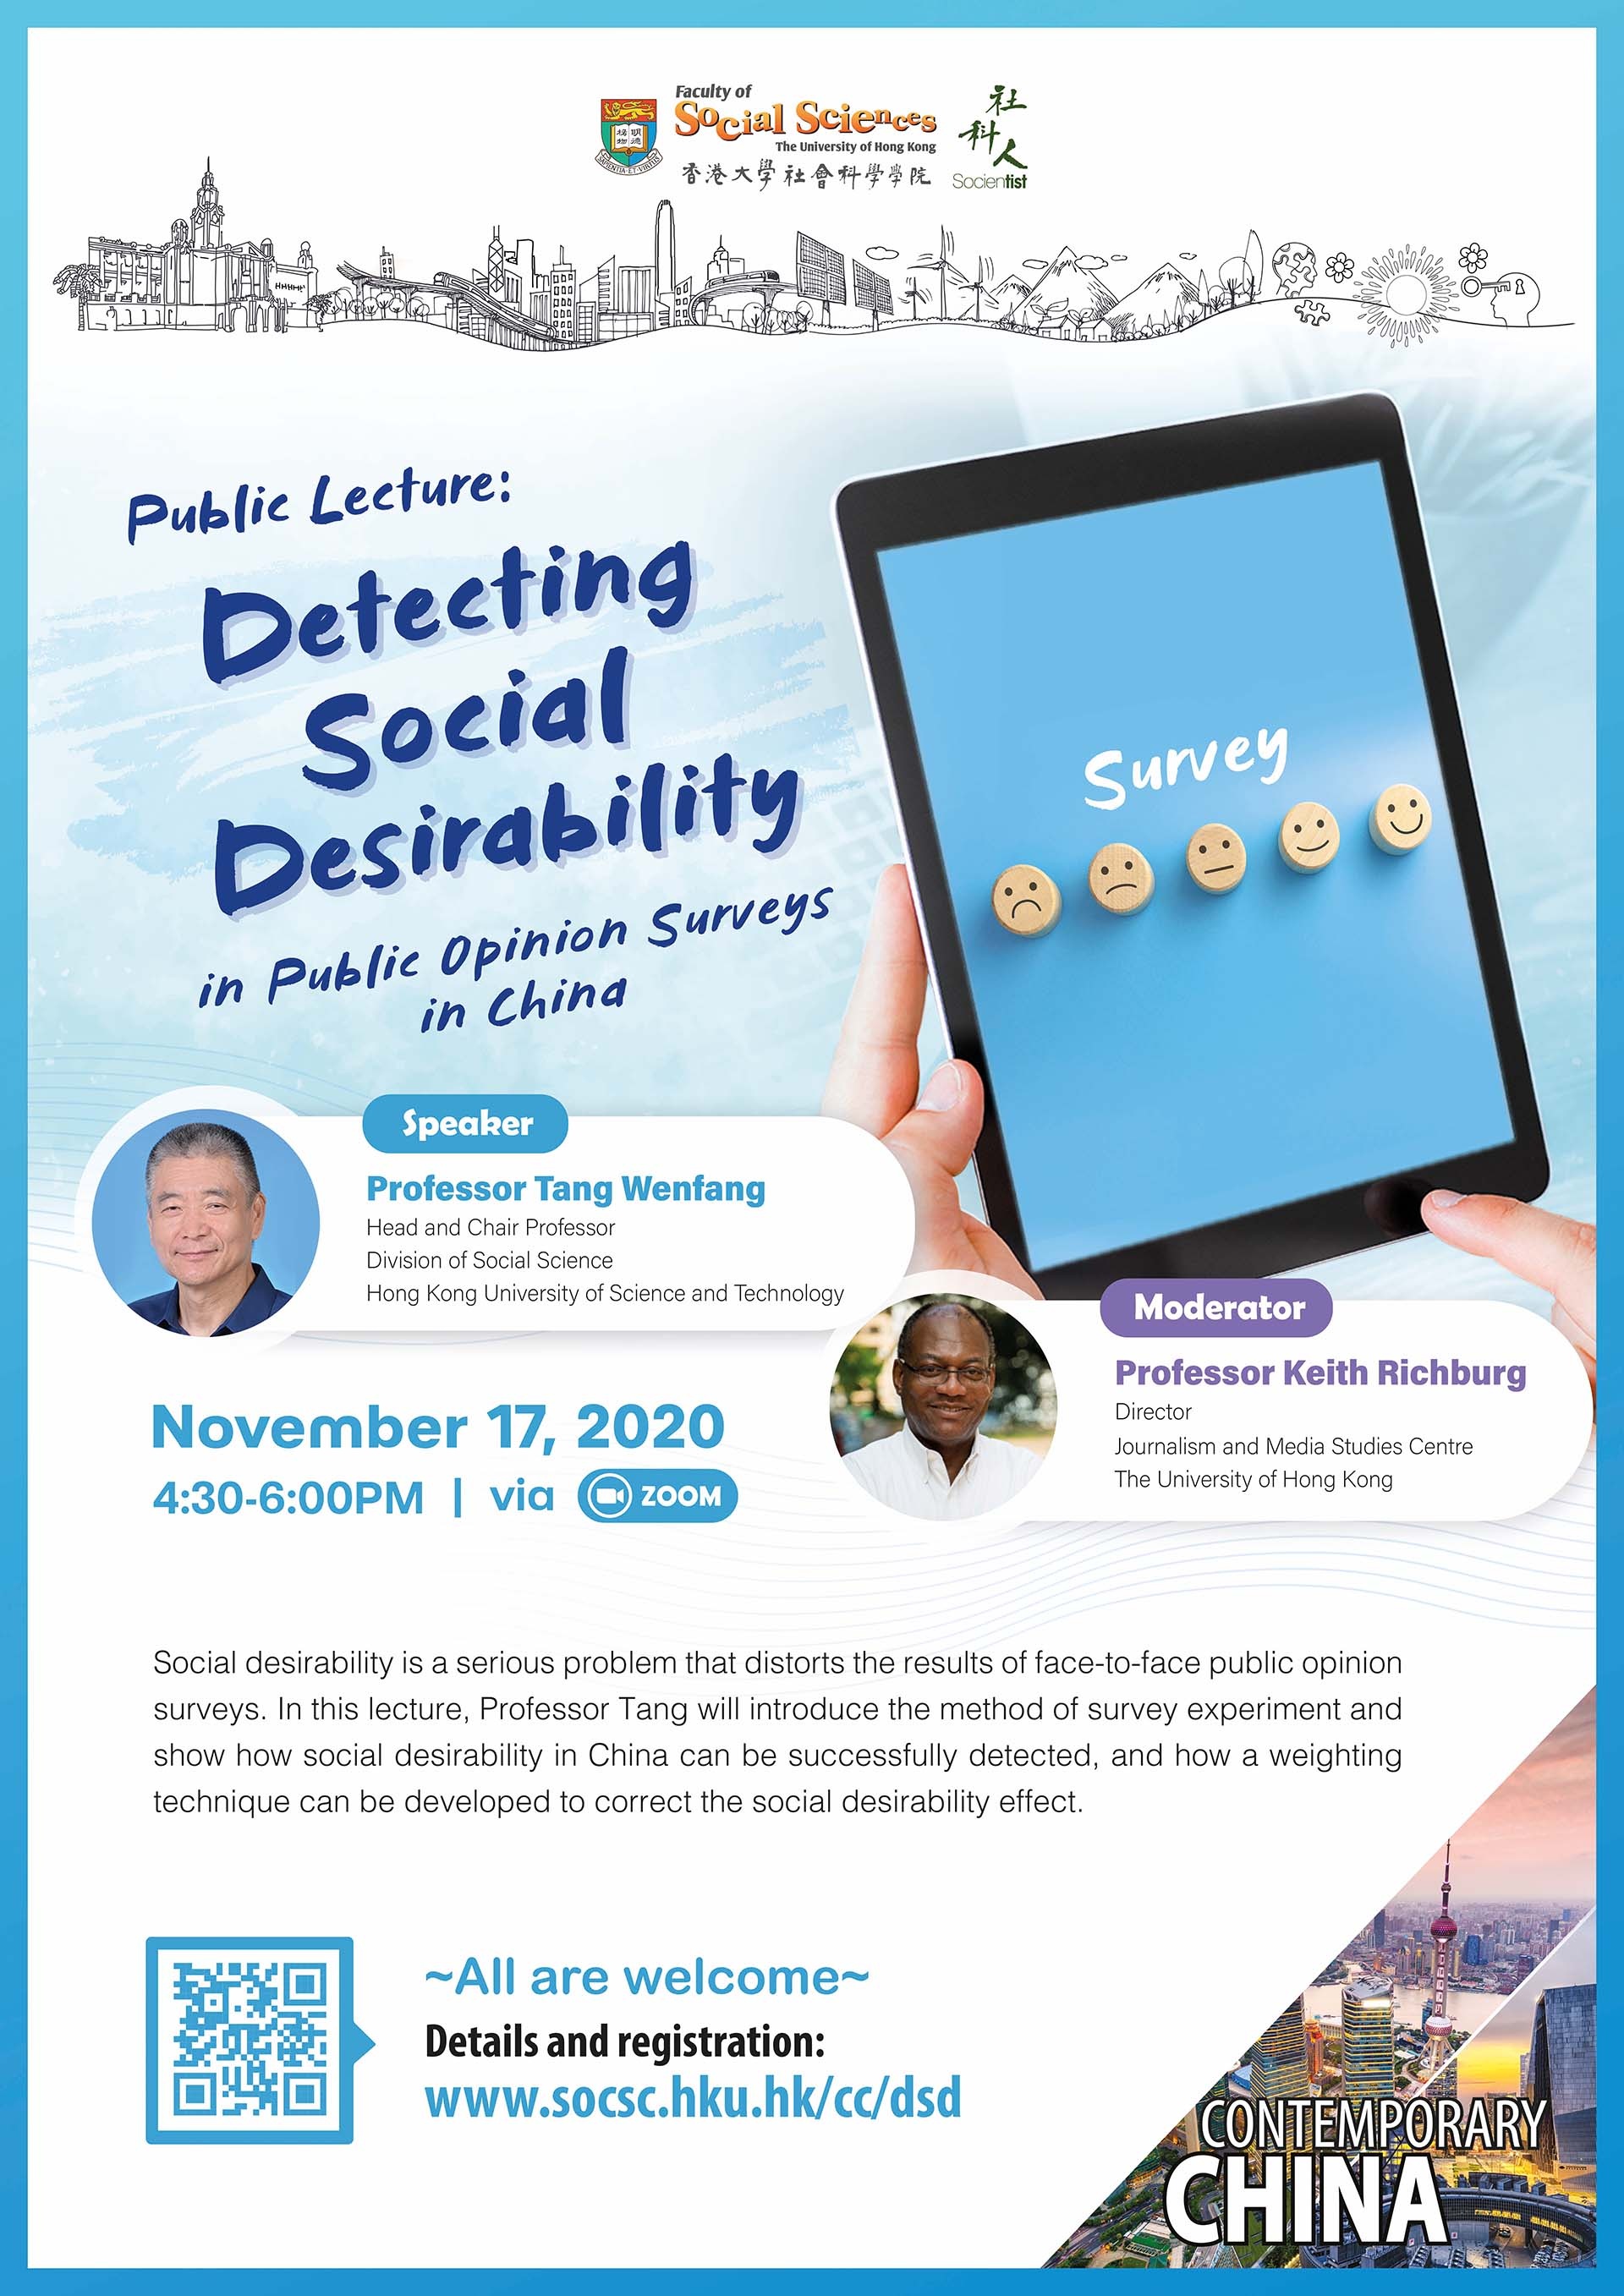 Contemporary China Research Cluster Public Lecture: Detecting Social Desirability in Public Opinion Surveys in China (November 17, 4:30pm)